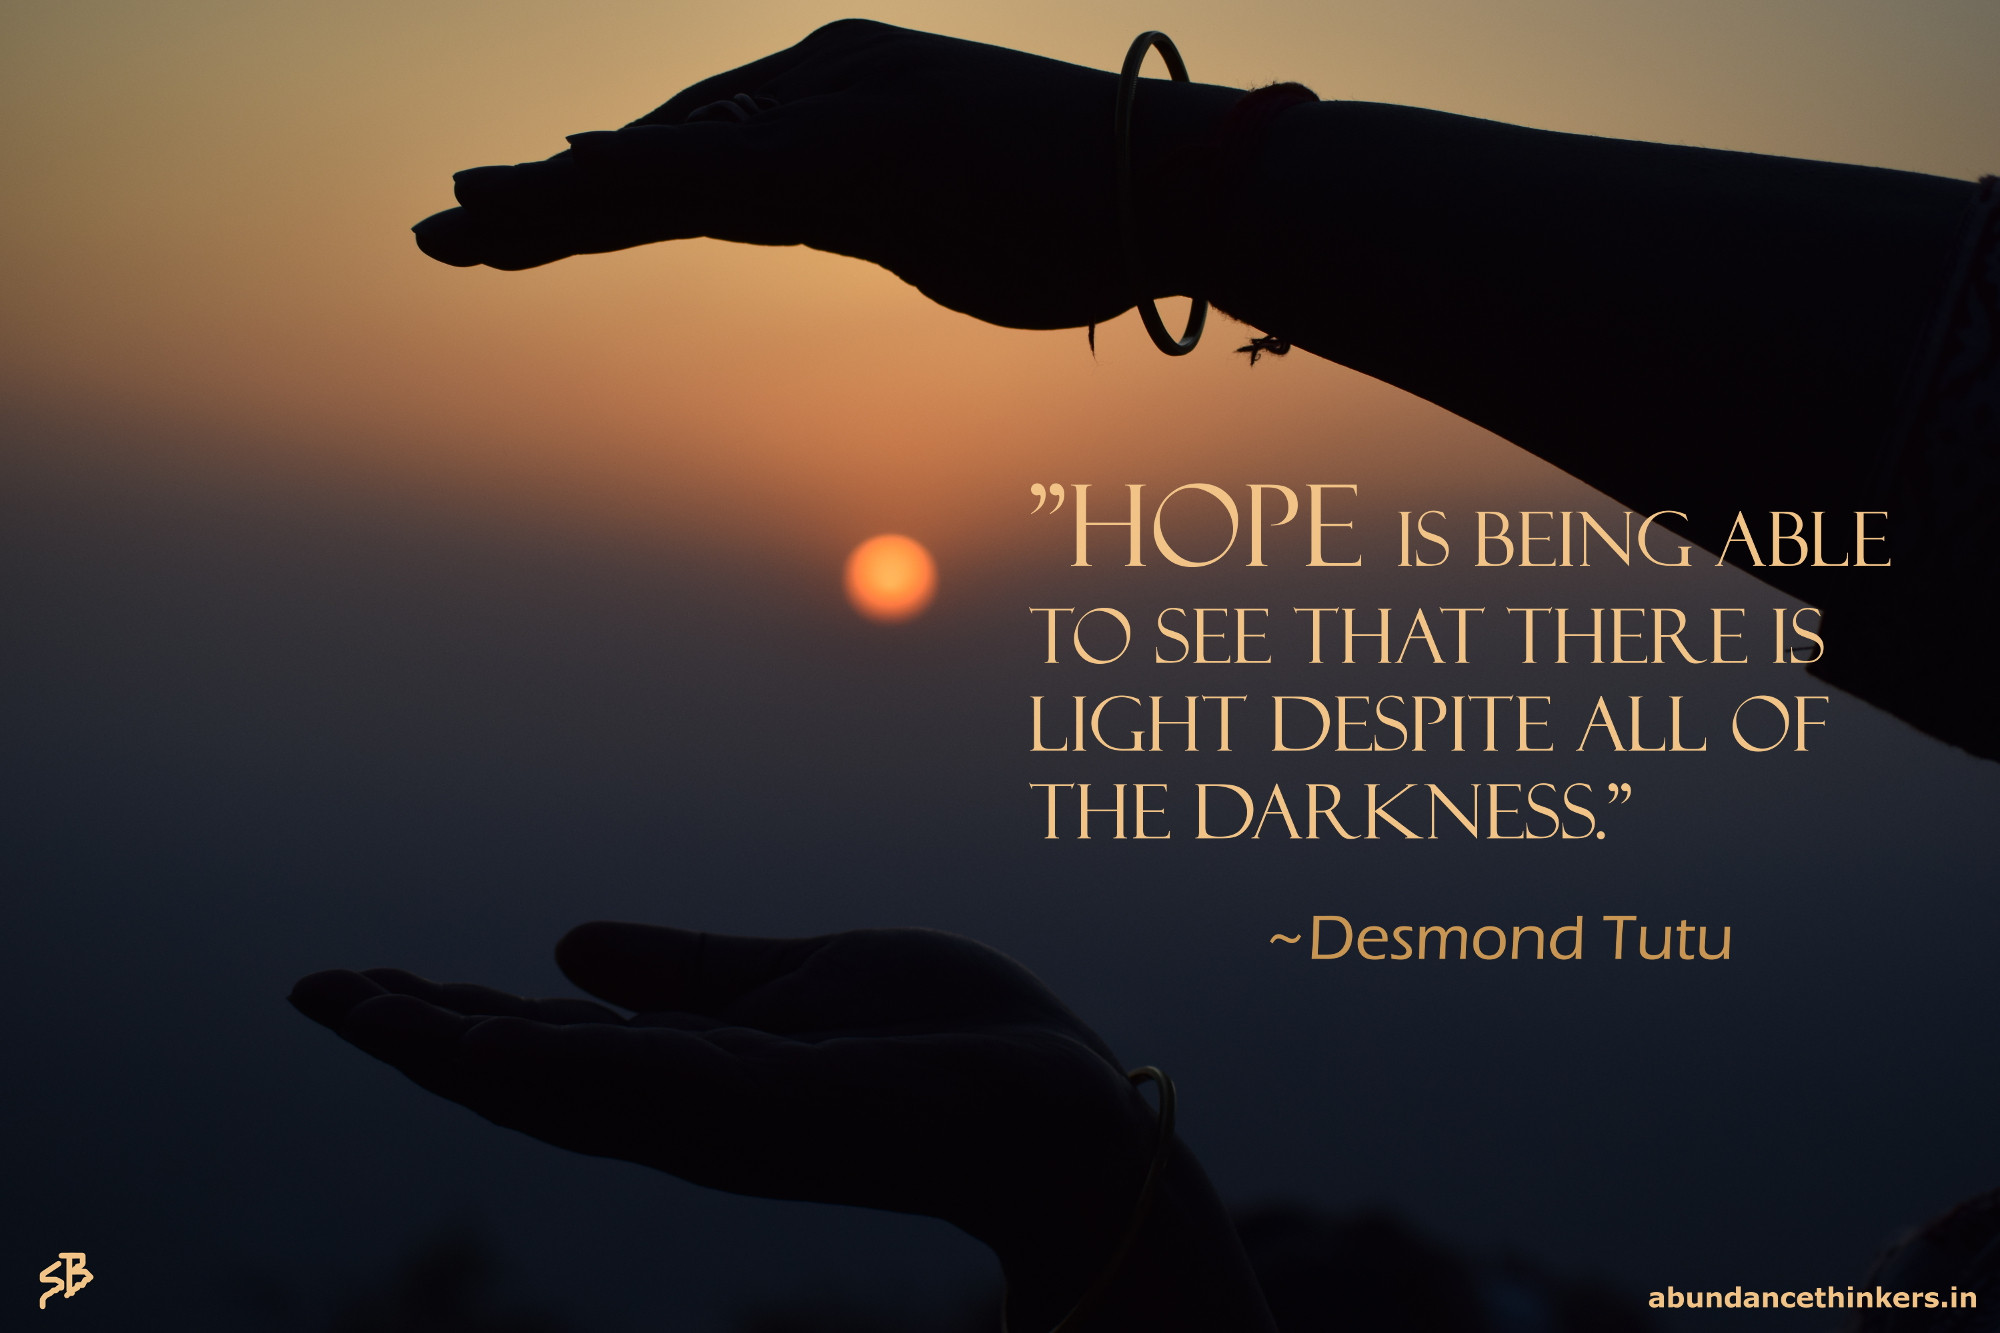 Hope Inspirational Quote
 16 Inspirational Quotes For A Troubled World